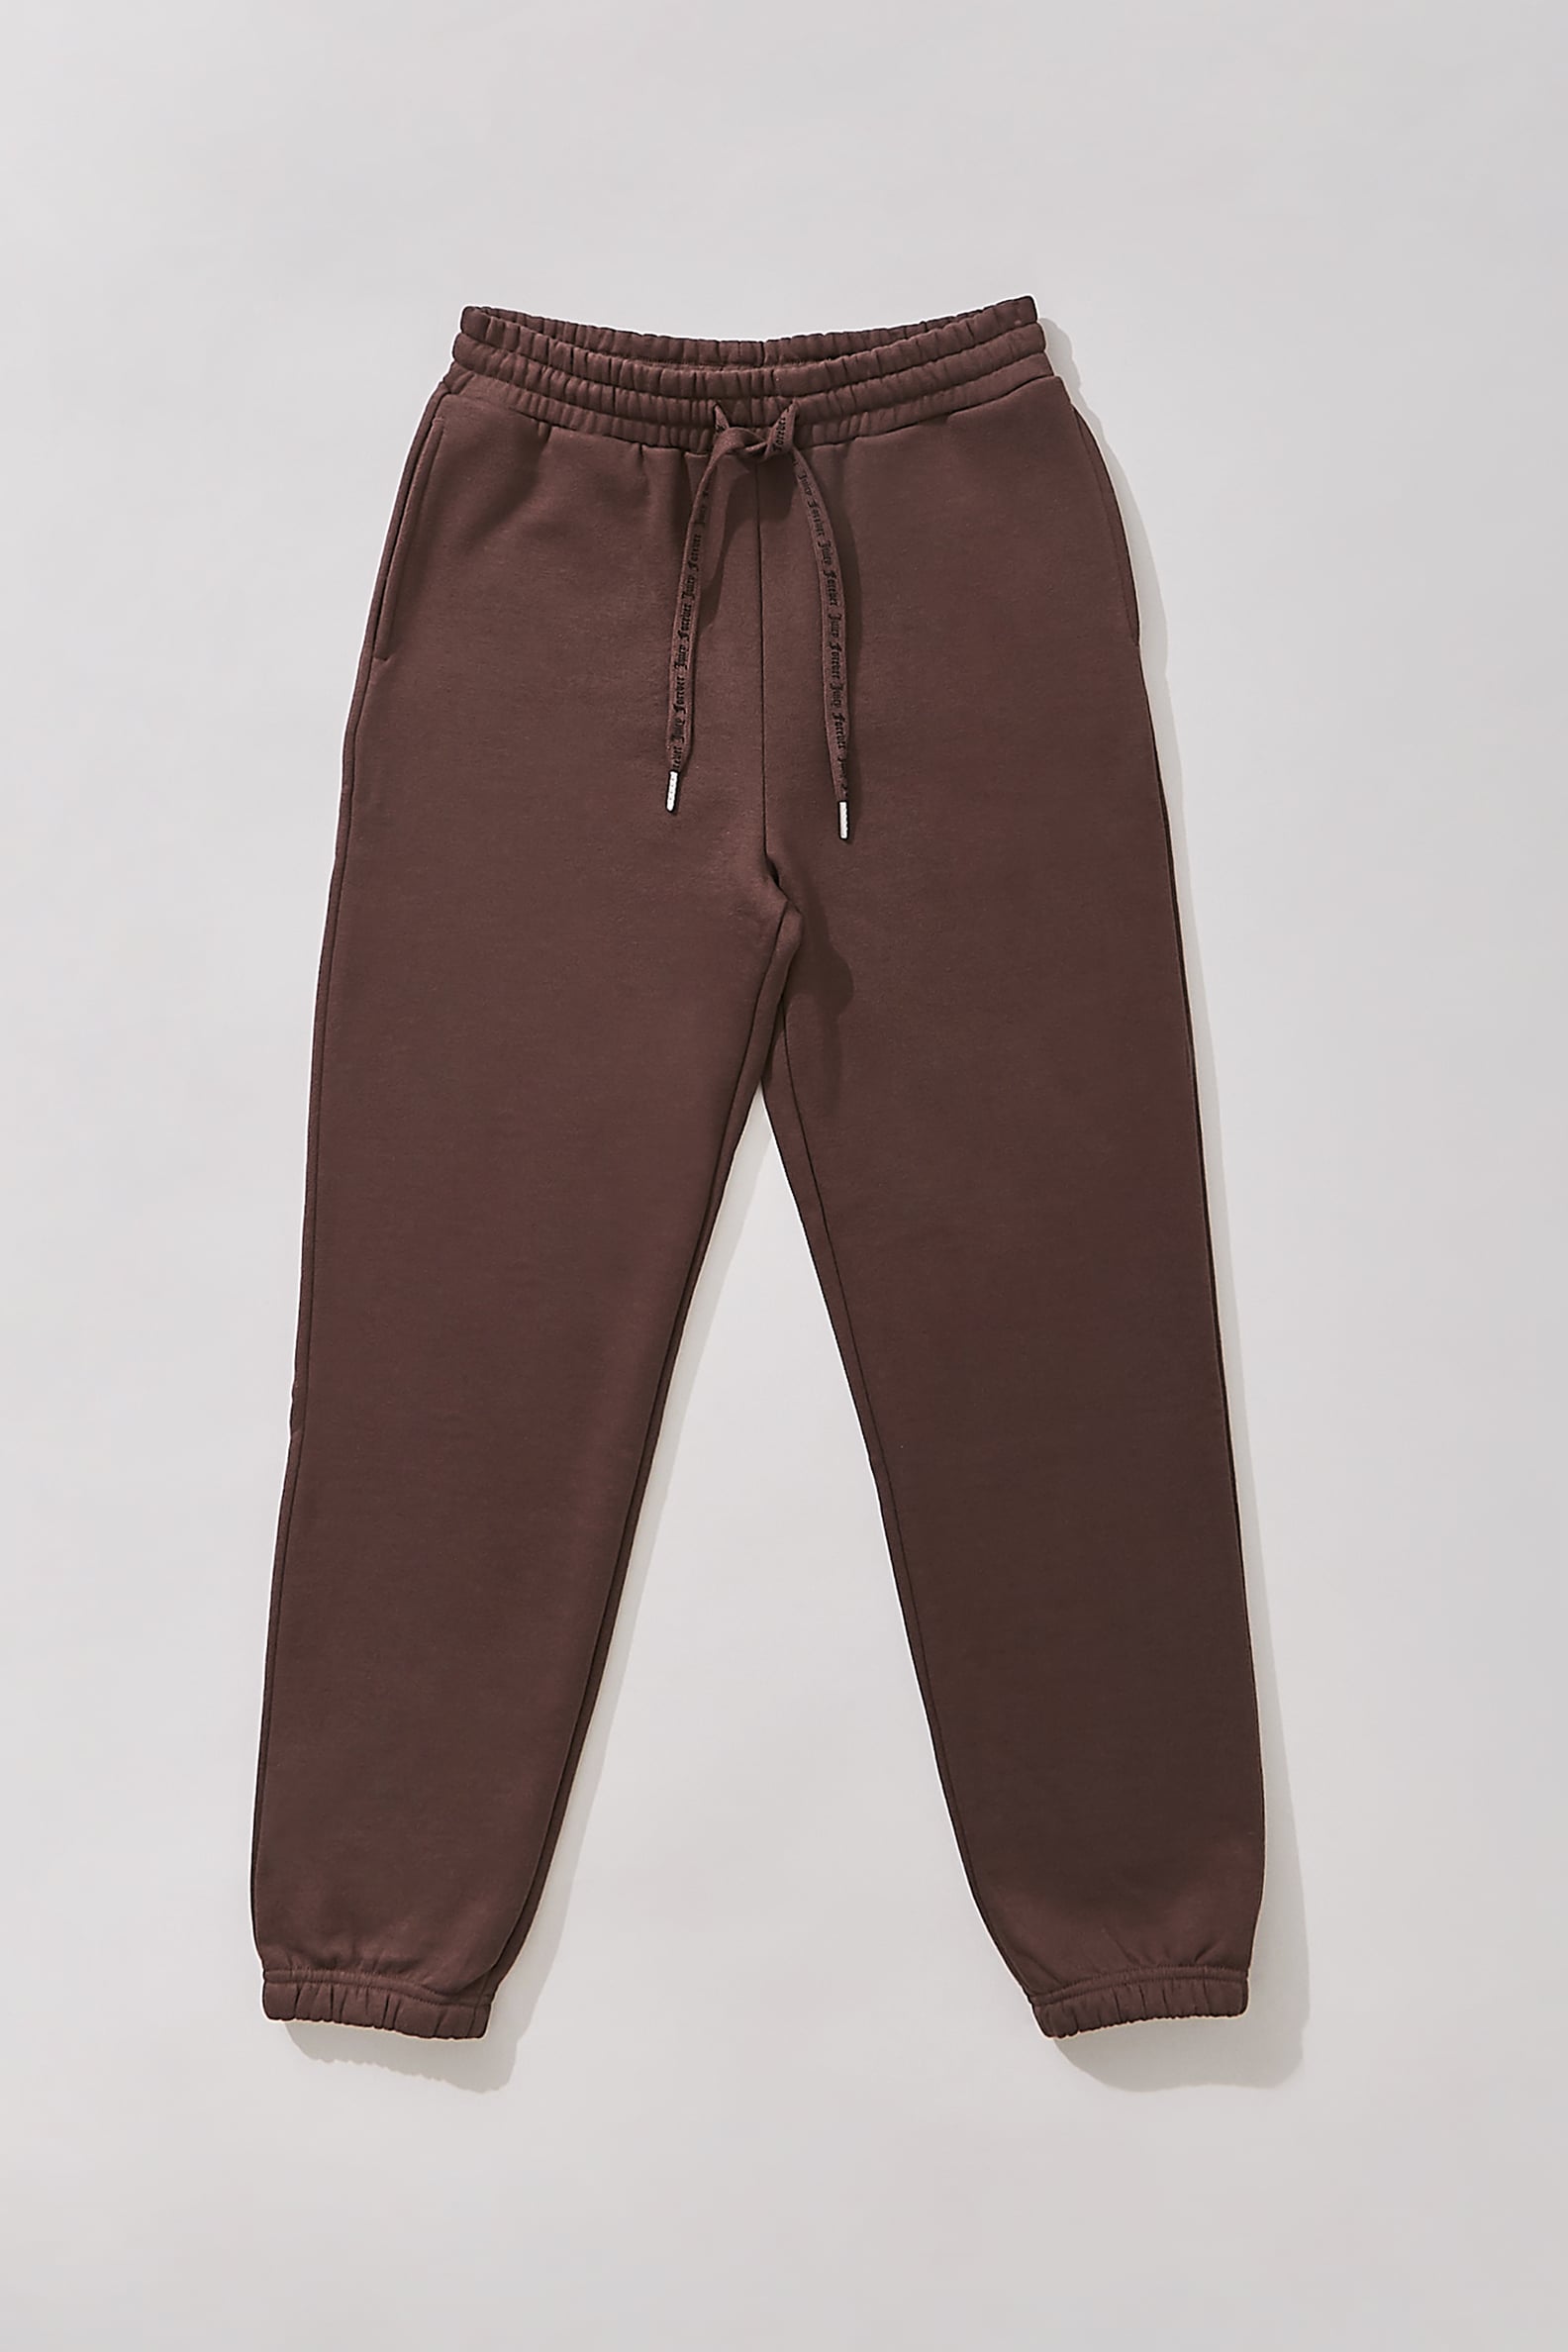 Juicy Couture Drops New Sweatsuit Collection at Forever 21 | POPSUGAR ...